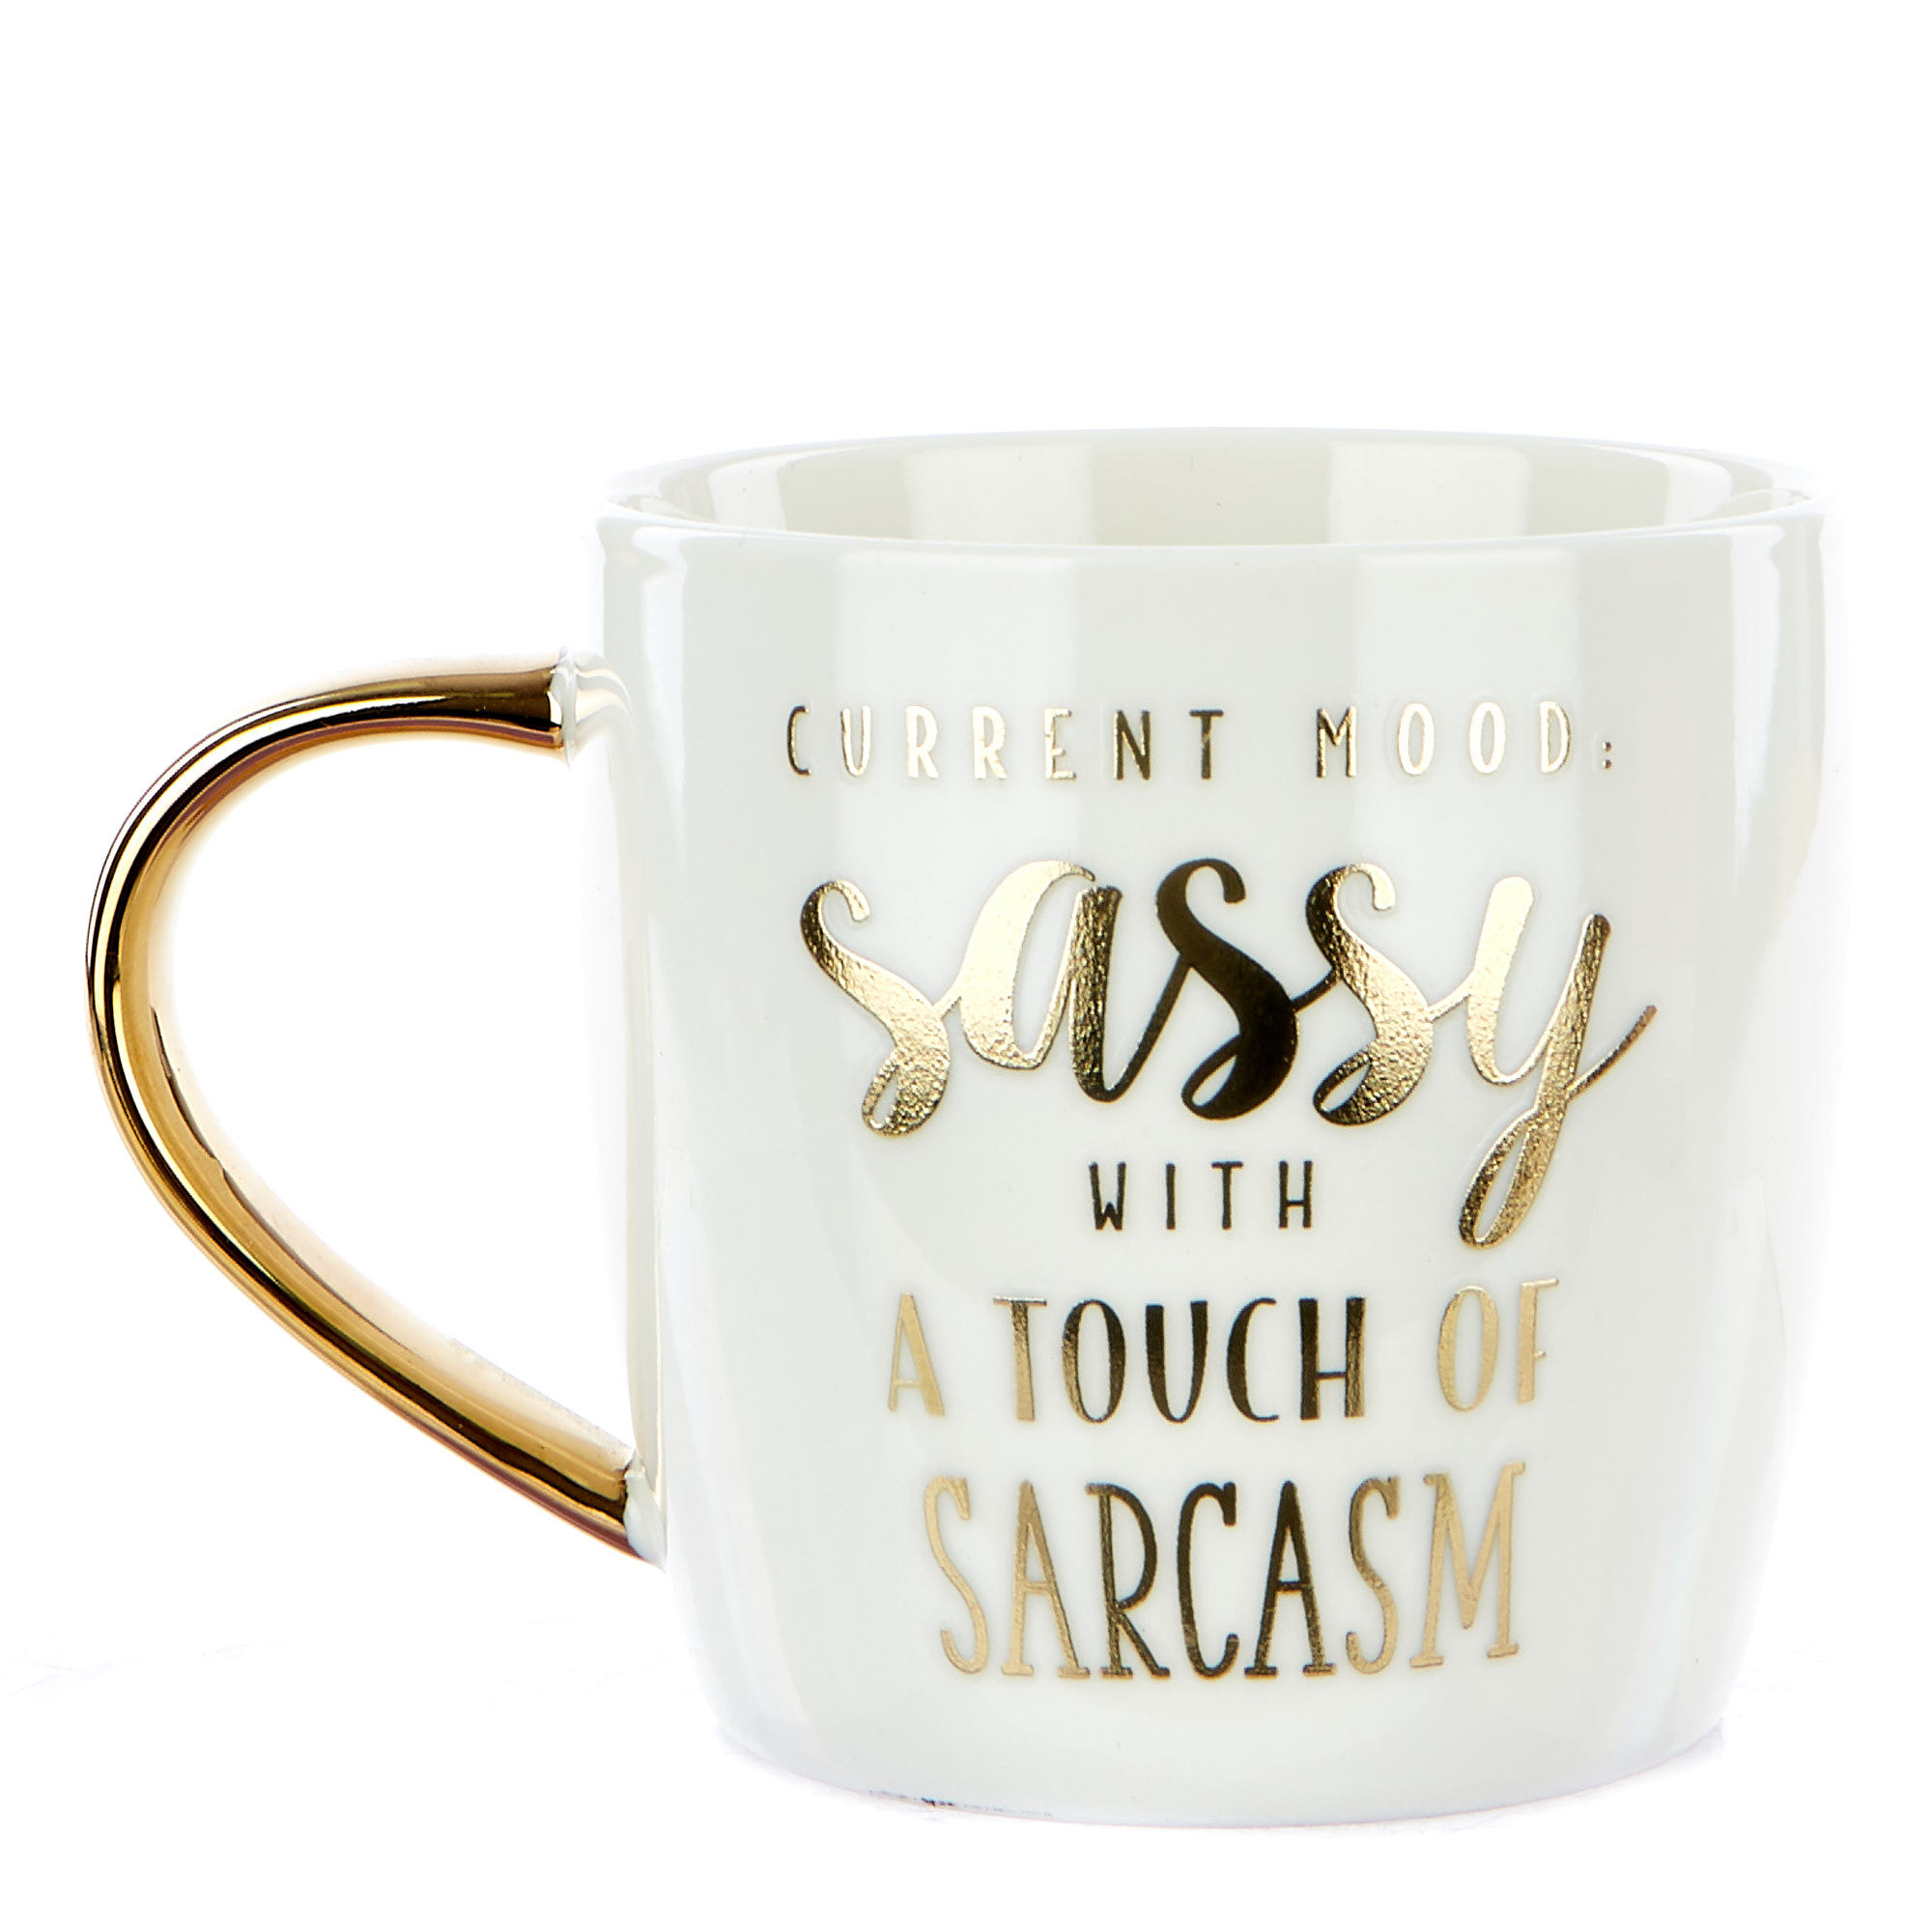 Sassy With A Touch Of Sarcasm" Mug"